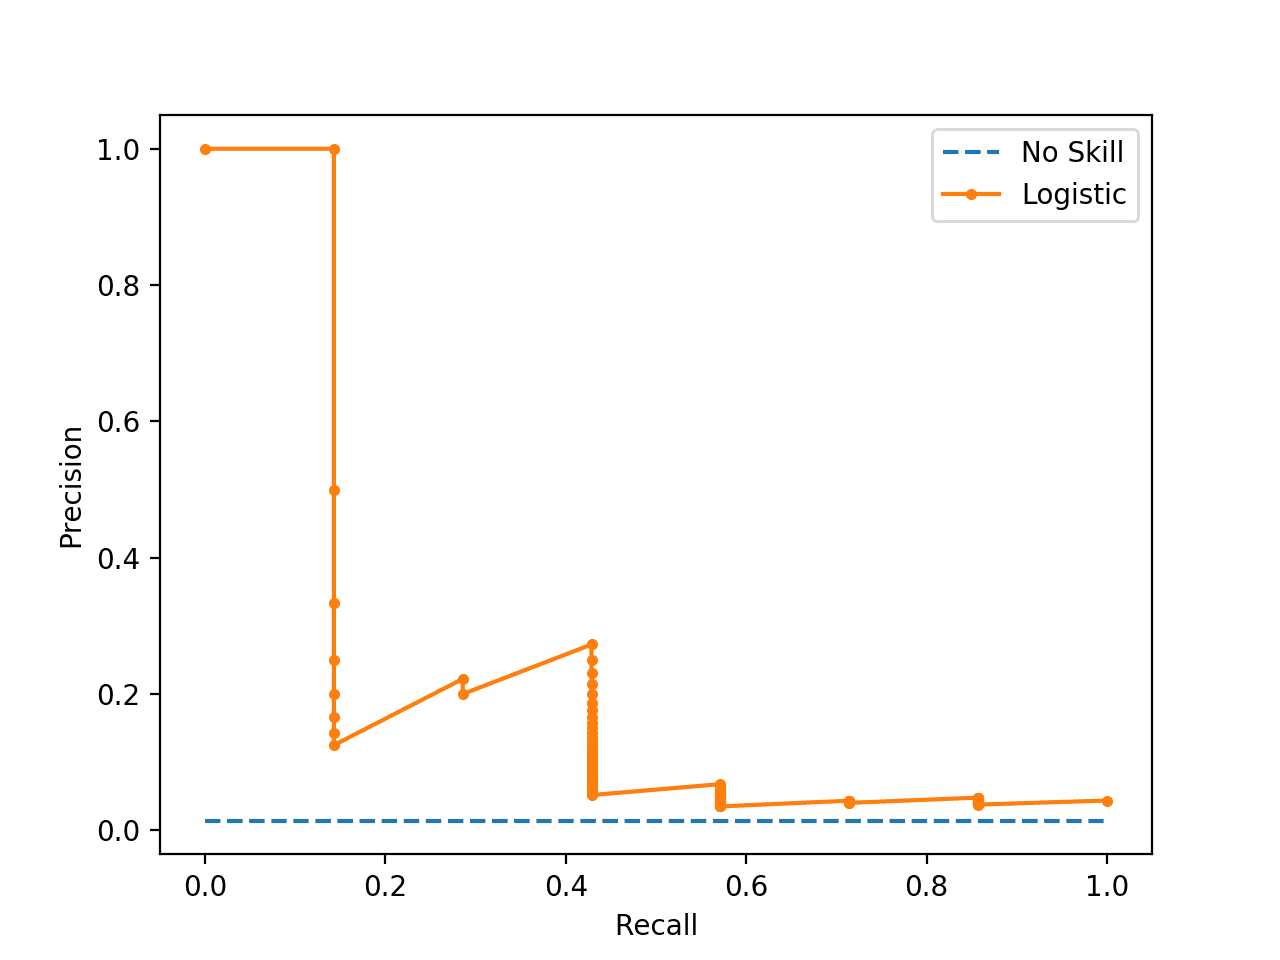 Plot of Precision-Recall Curve for Logistic Regression on Imbalanced Classification Dataset